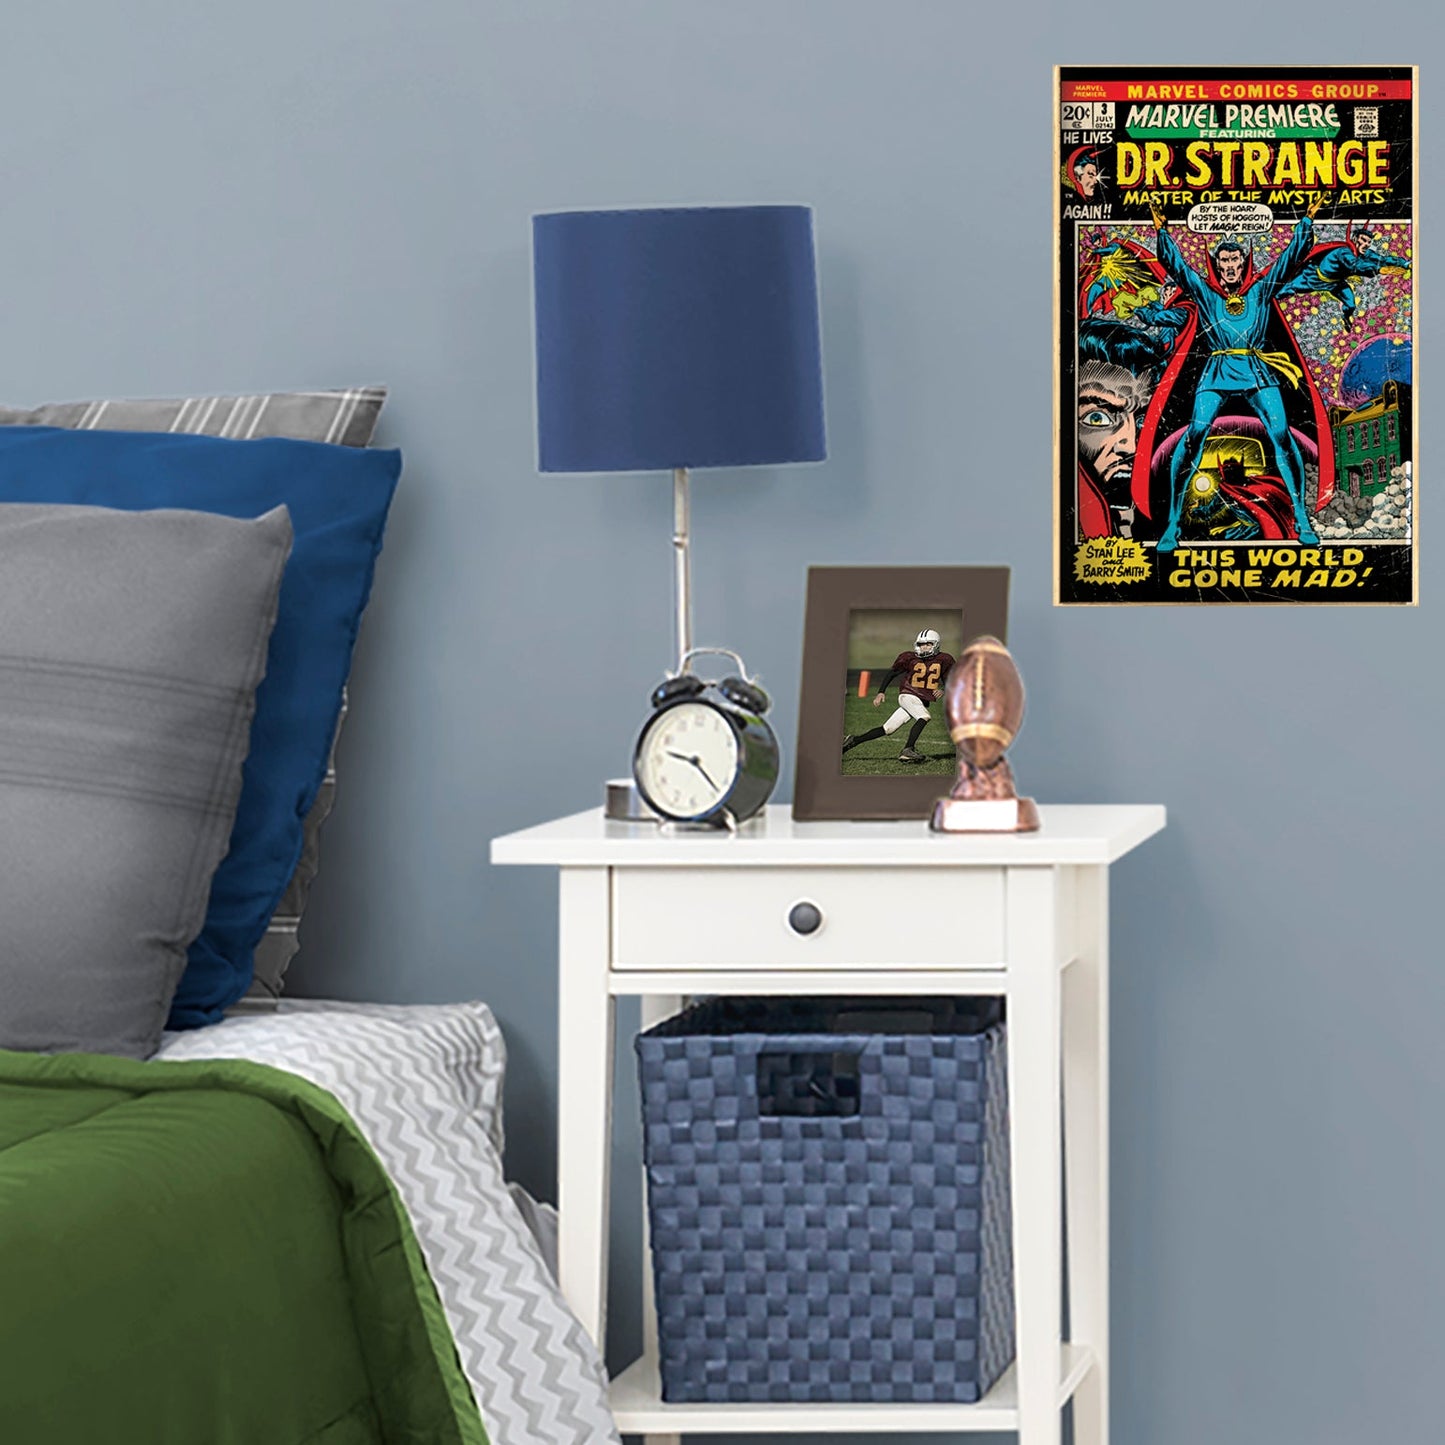 Dr. Strange:  Mural        - Officially Licensed Marvel Removable     Adhesive Decal